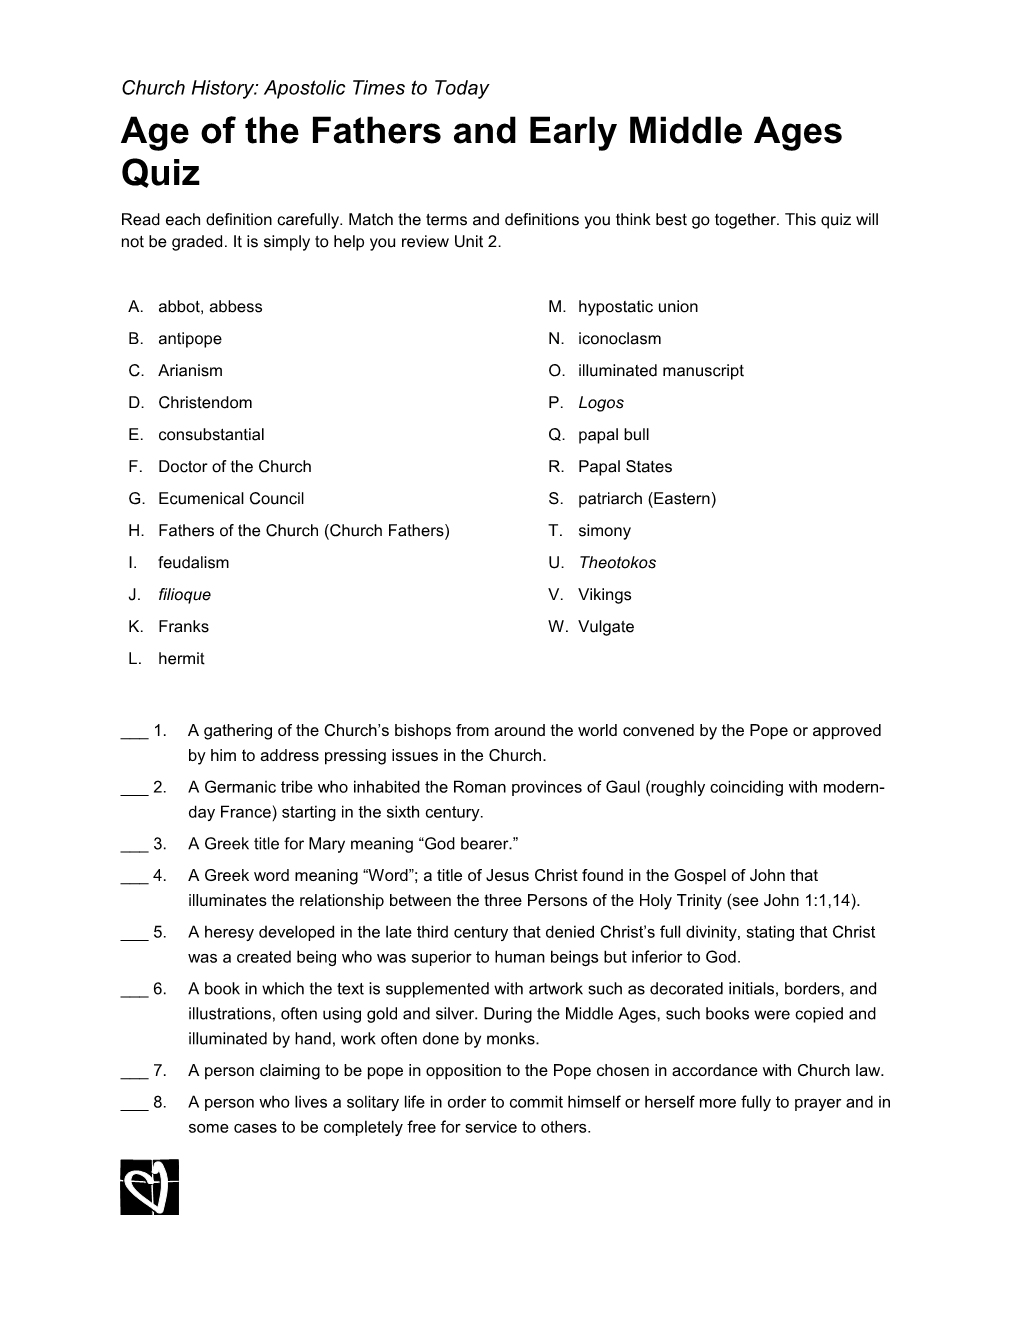 Age of the Fathers and Early Middle Ages Quiz